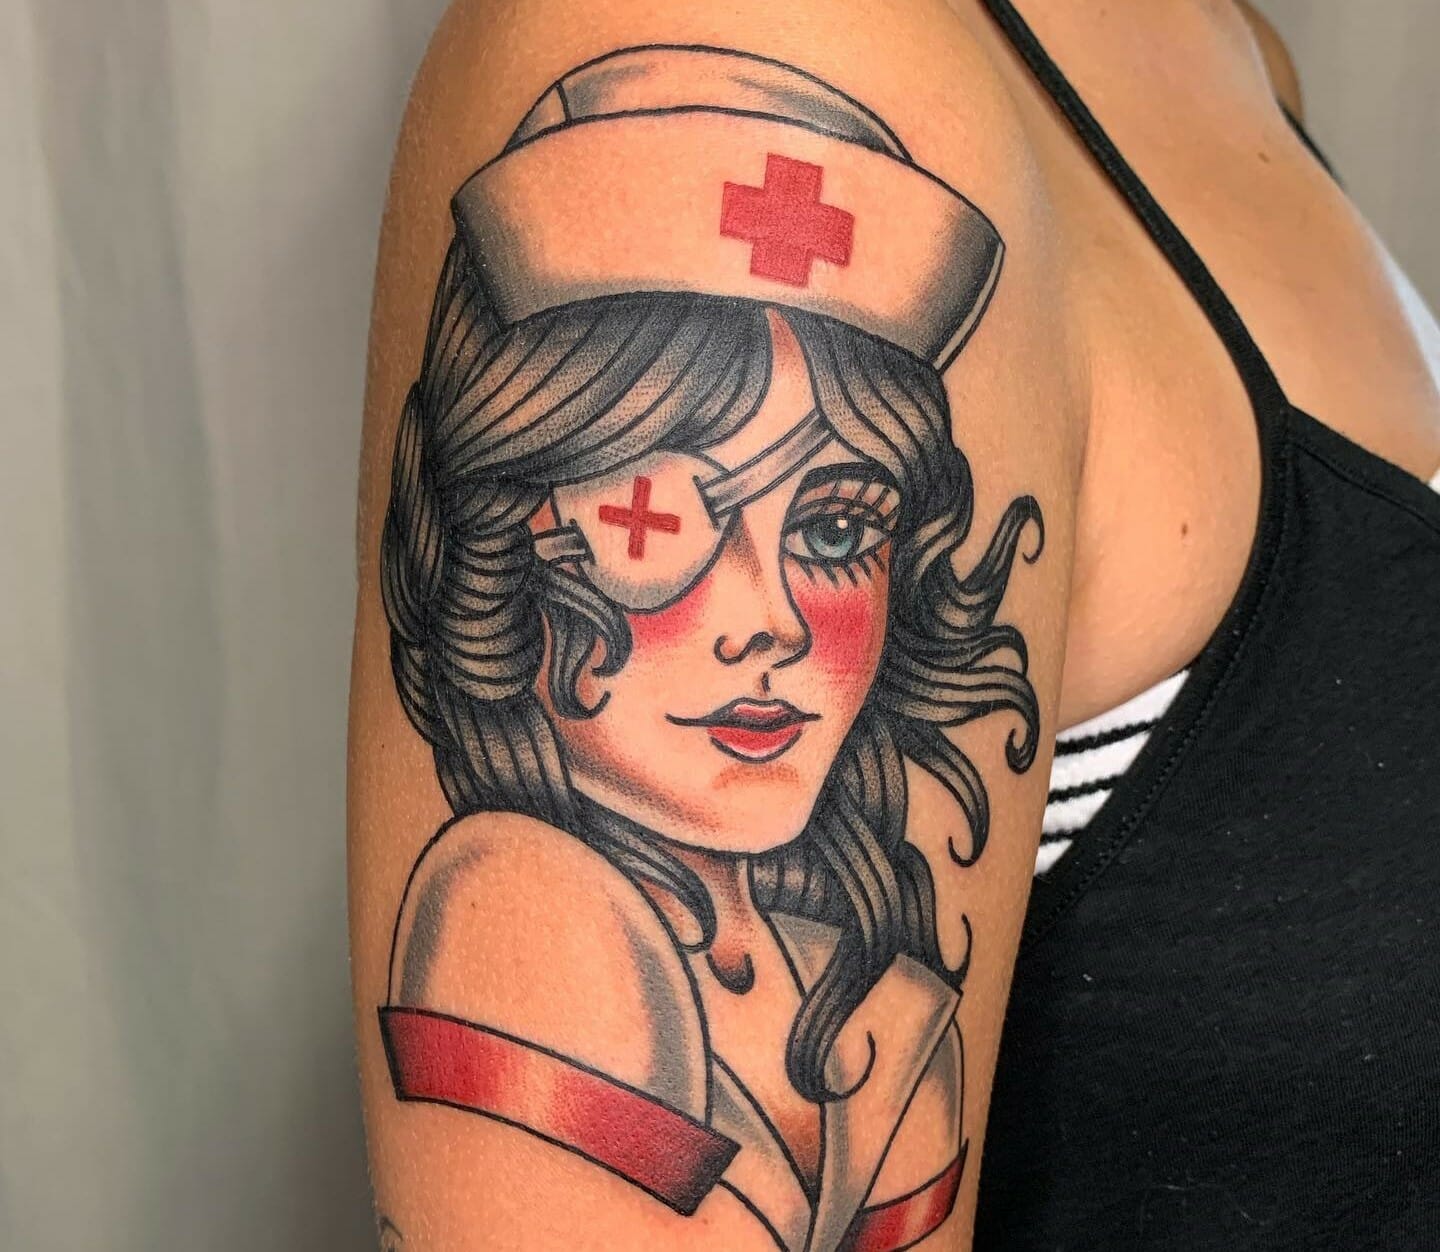 101 Best Pin Up Nurse Tattoo Ideas That Will Blow Your Mind! - Outsons